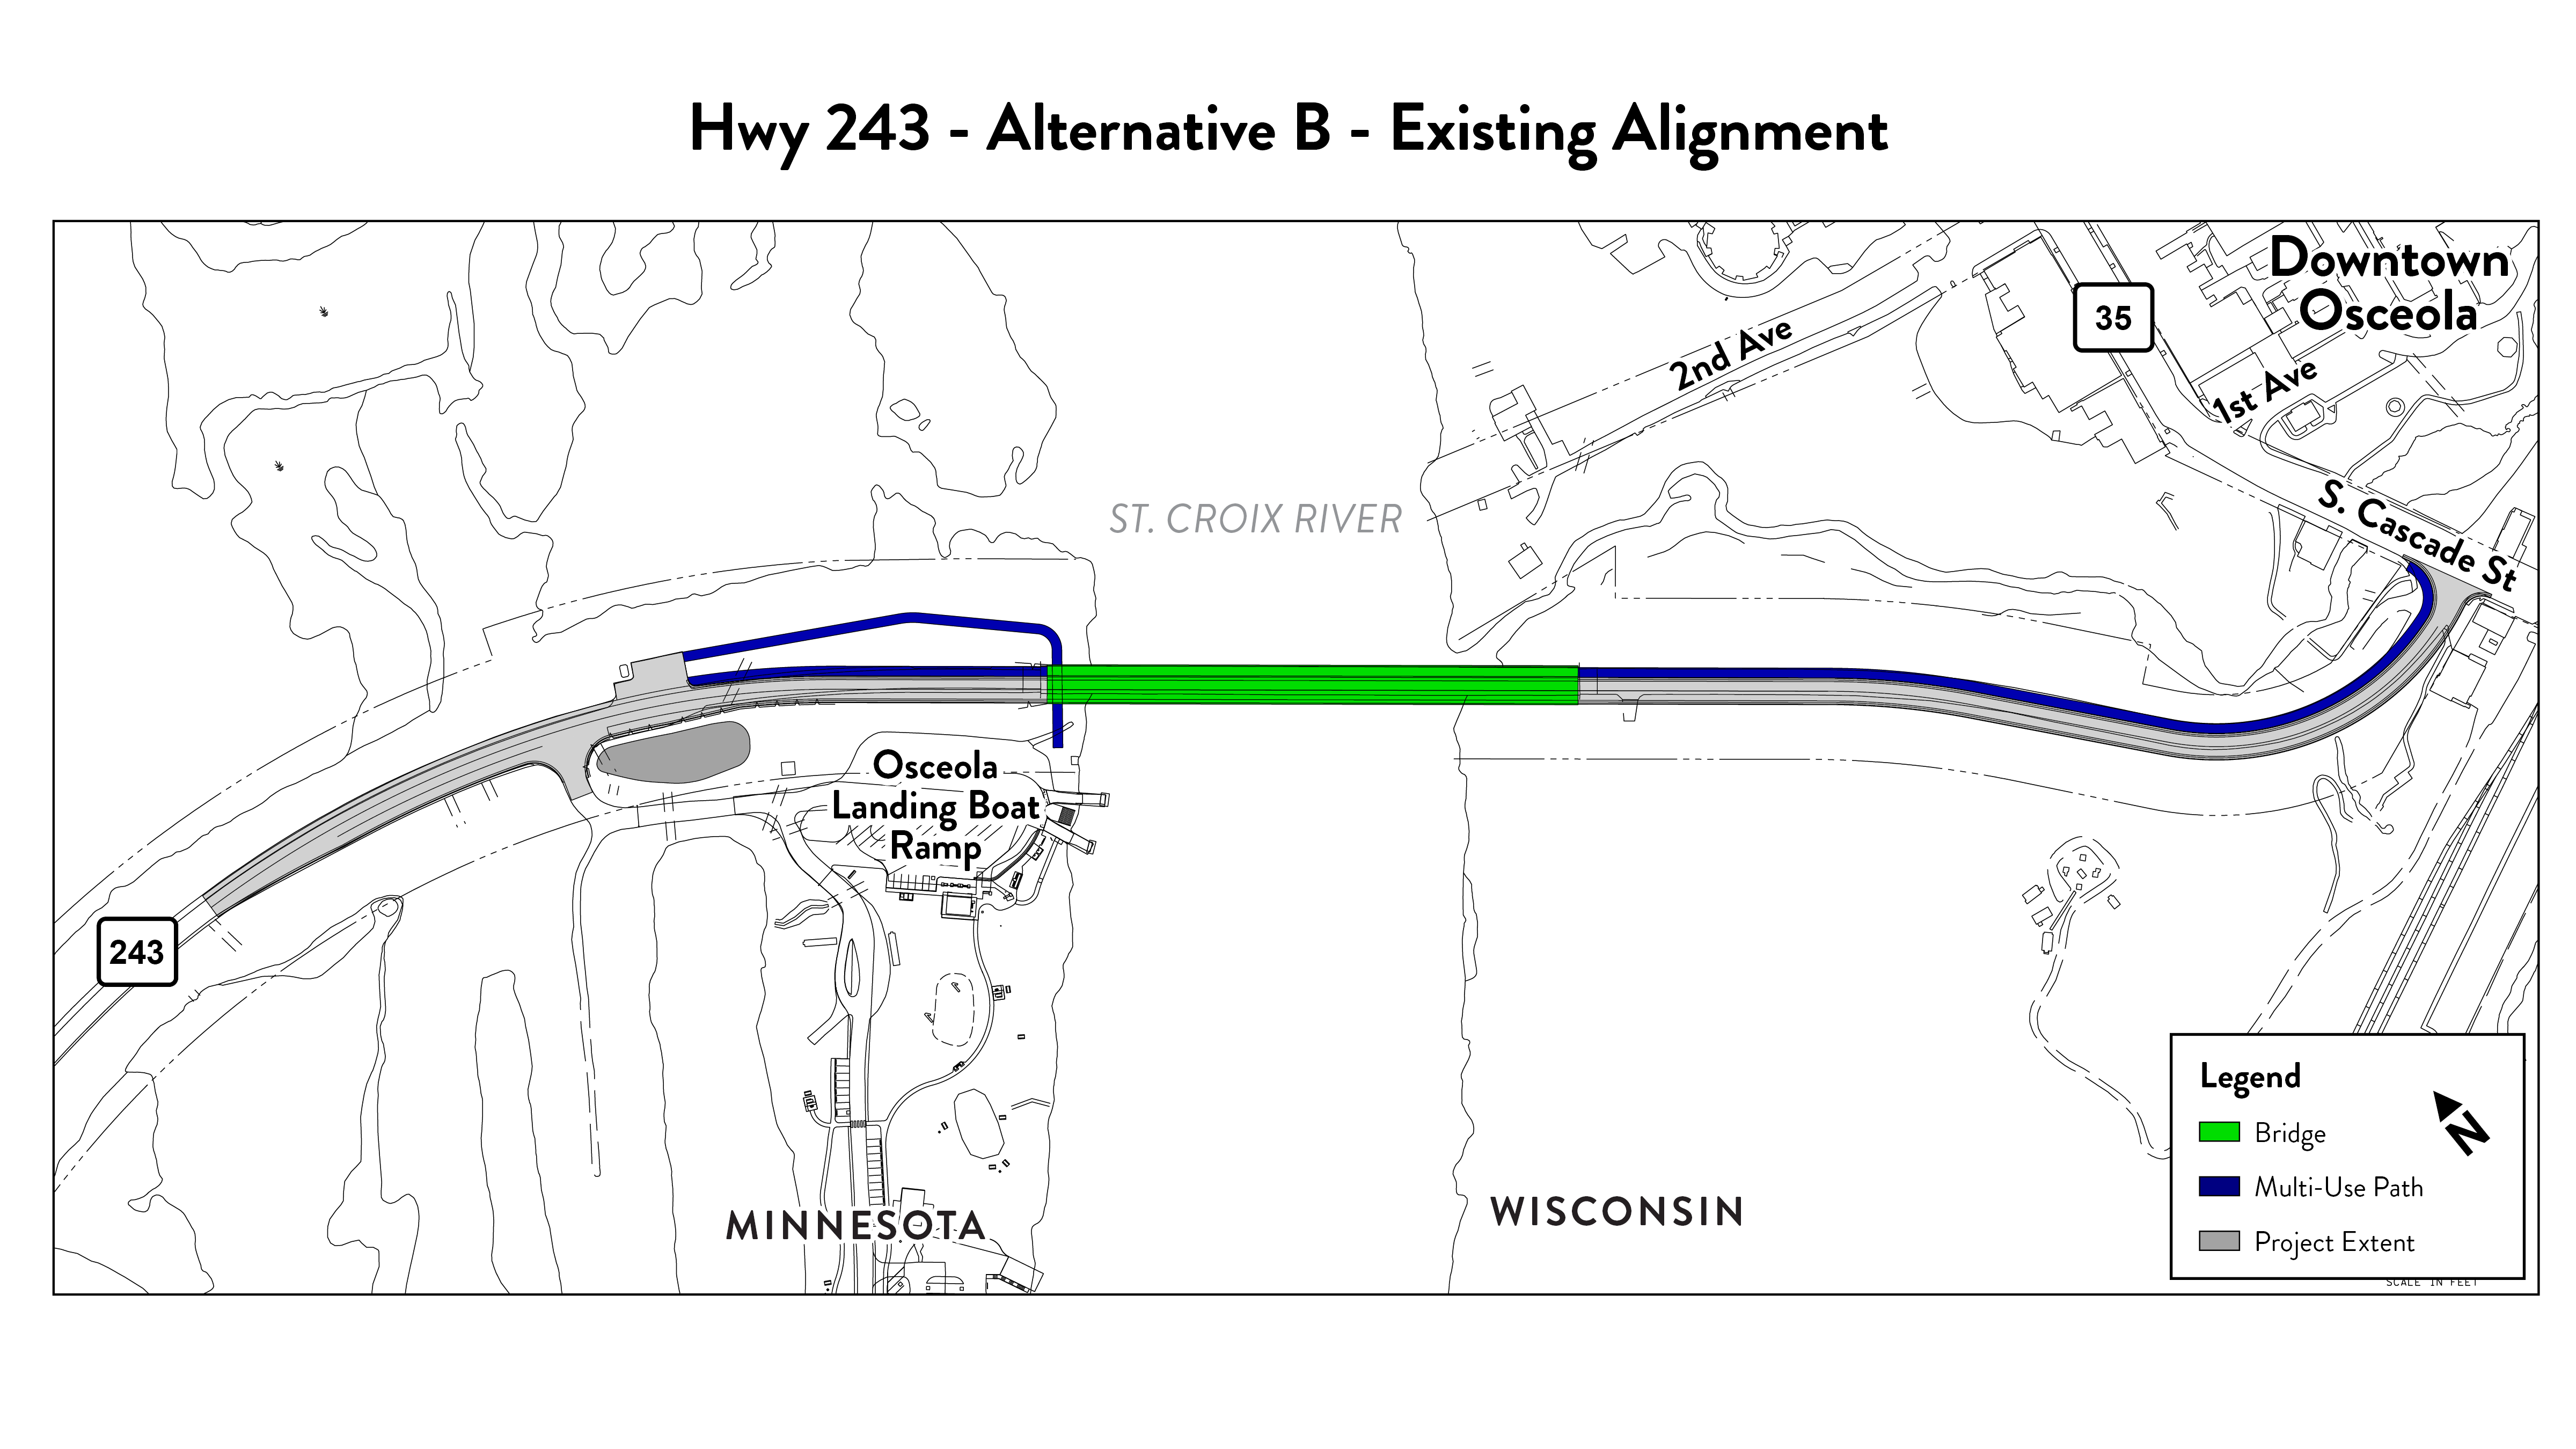 Shows alternative B, including construction limits, proposed and existing road, and path for people walking or biking.